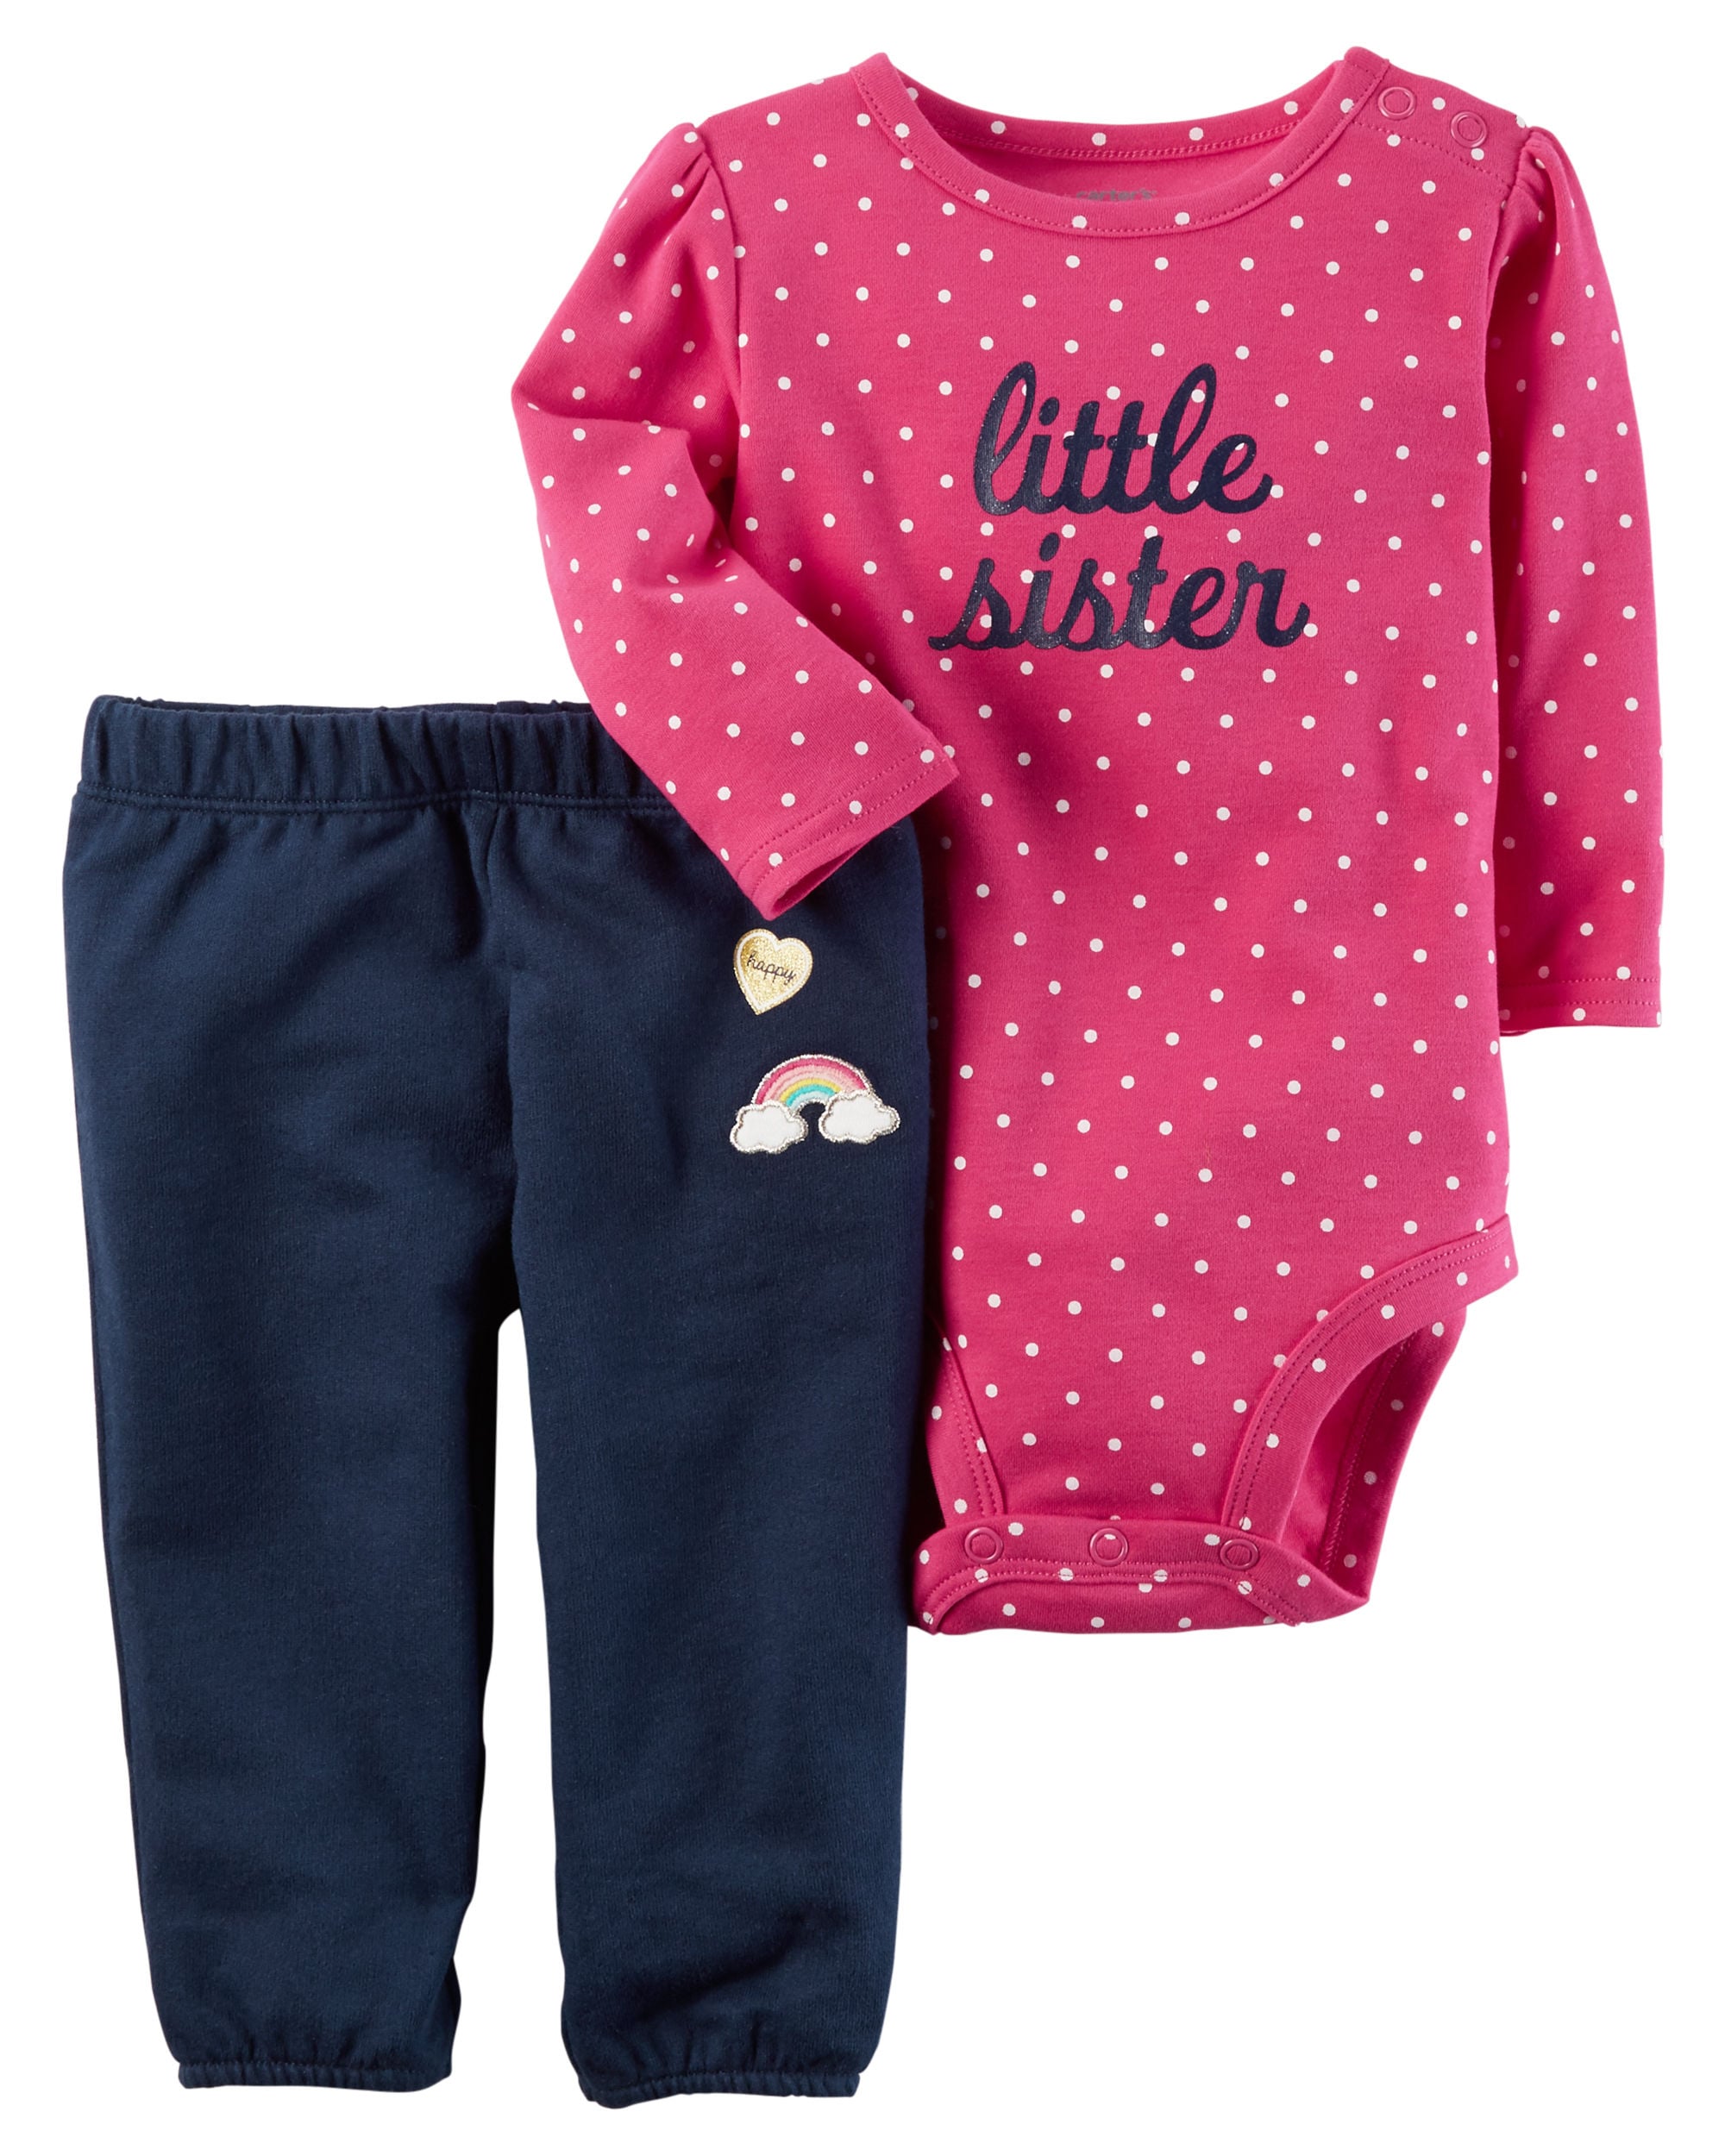 carter's little sister outfit